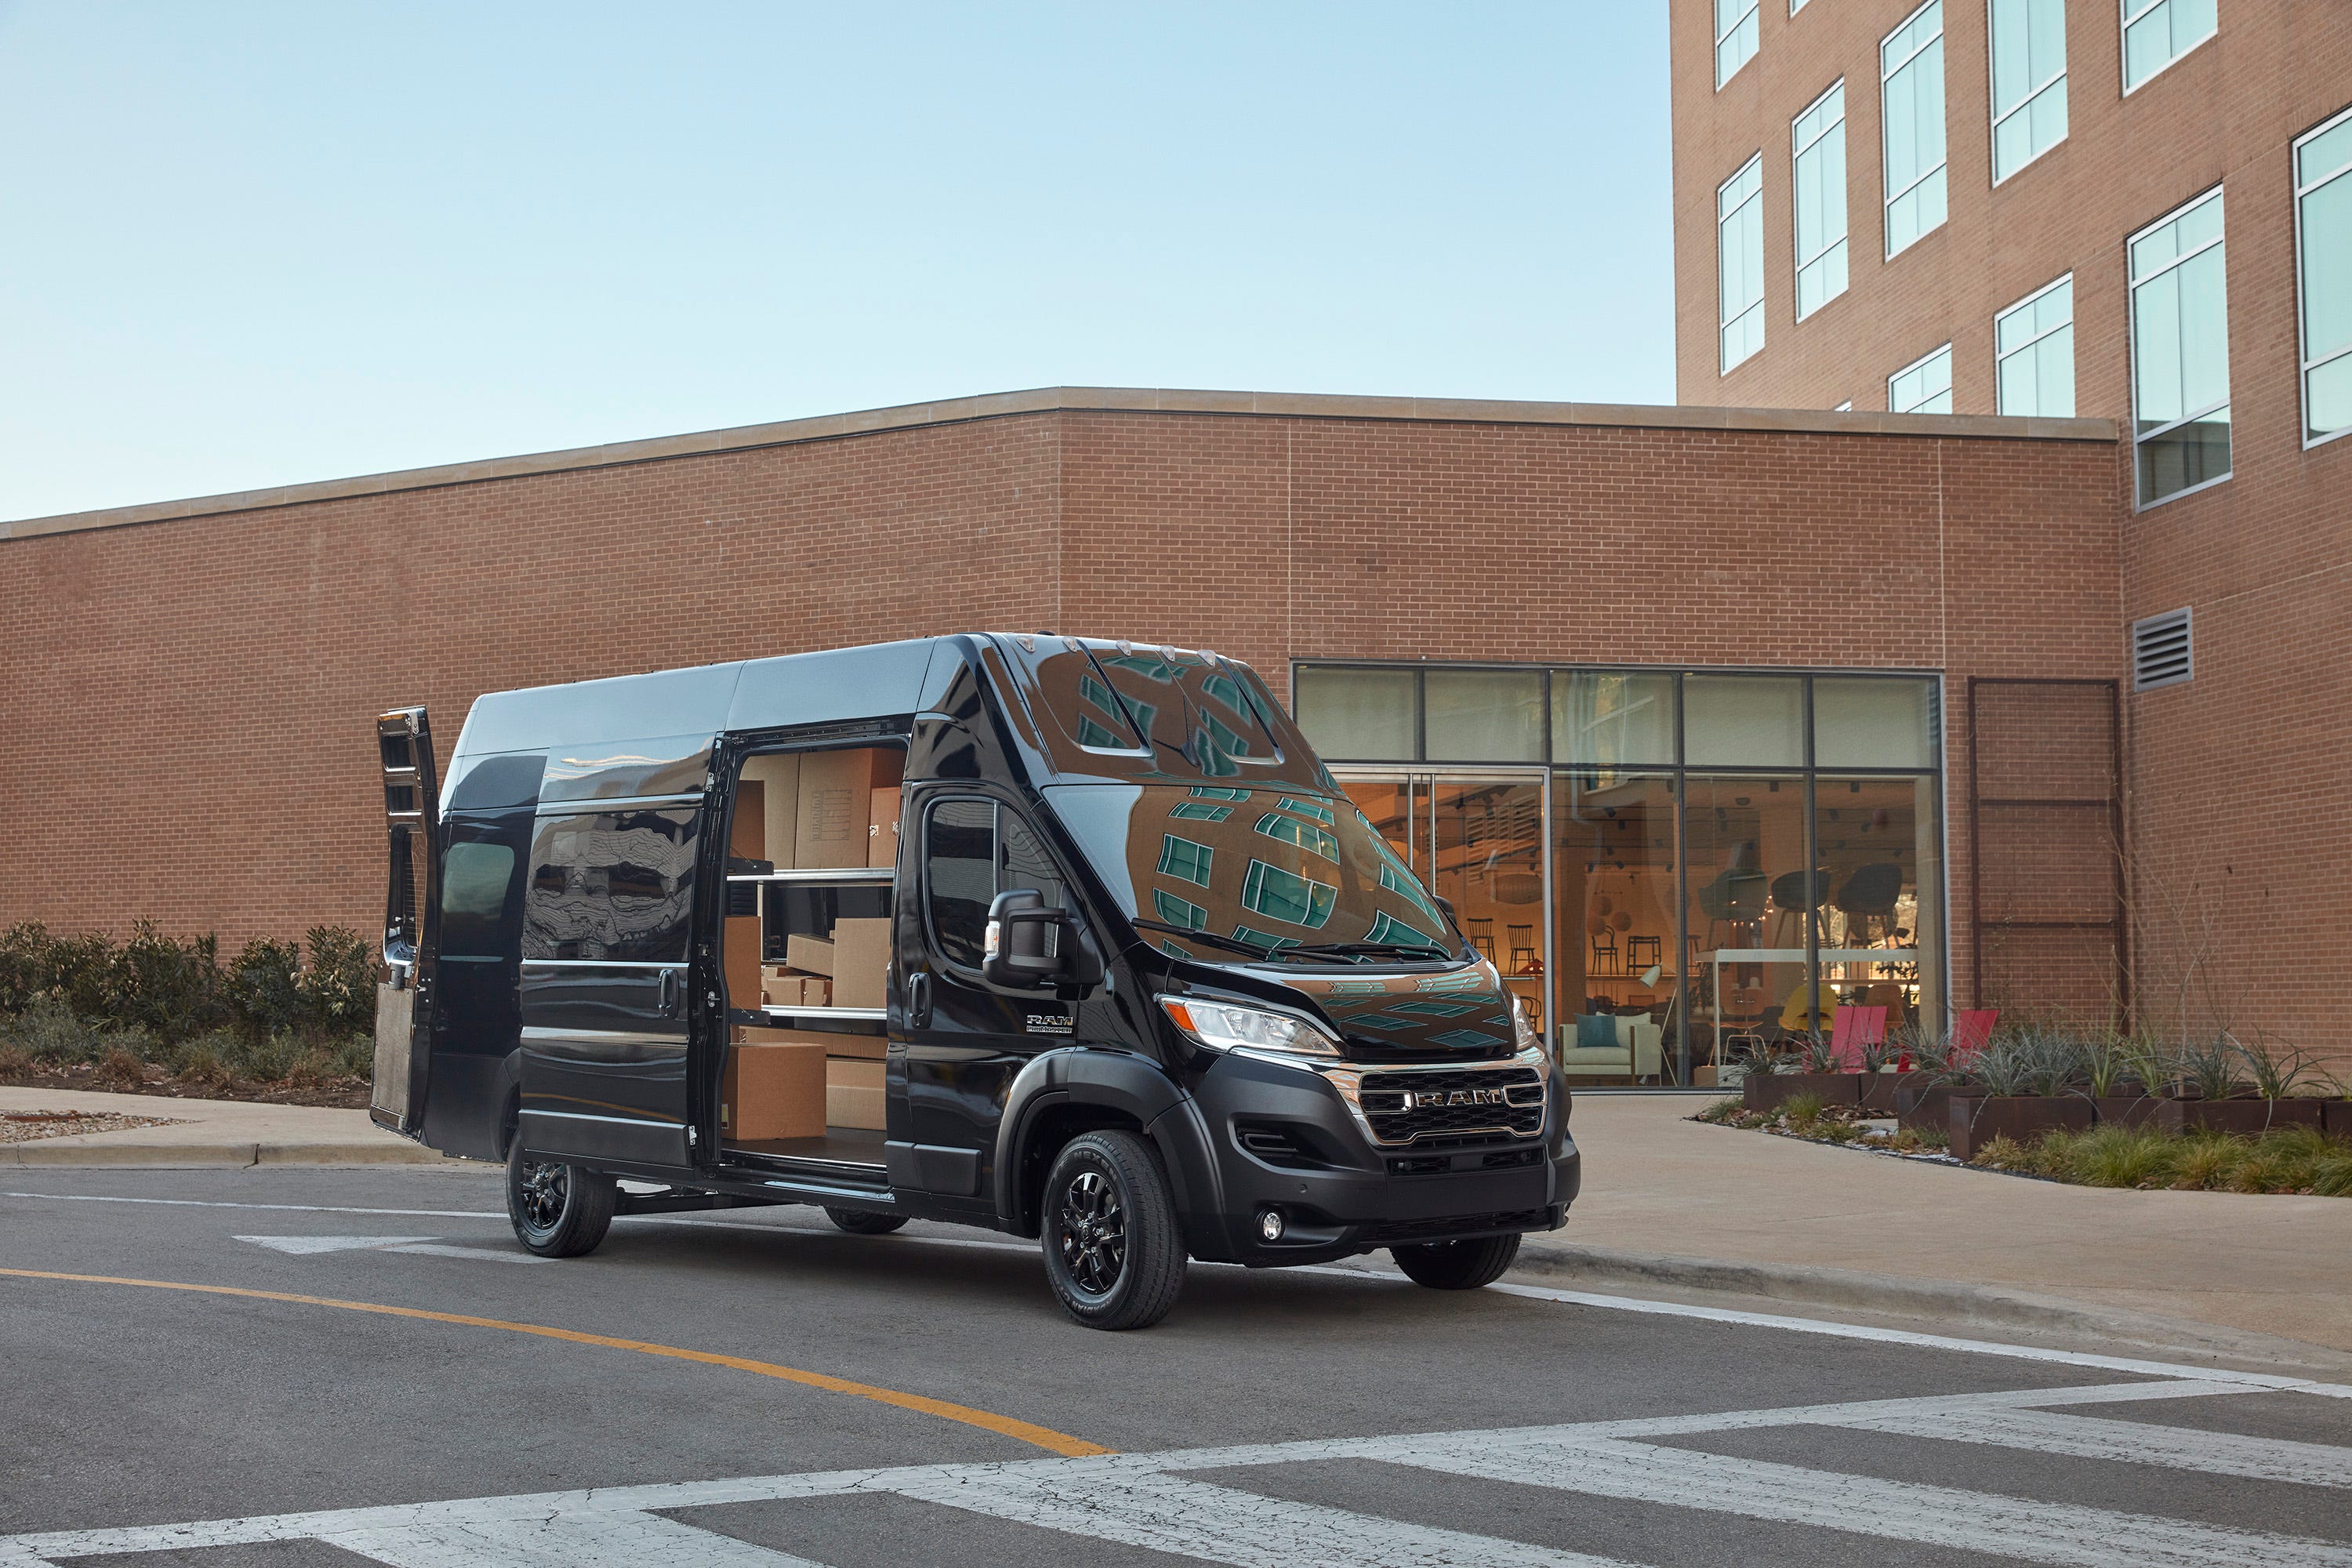 2023 Ram ProMaster delivery van to be unveiled Wednesday